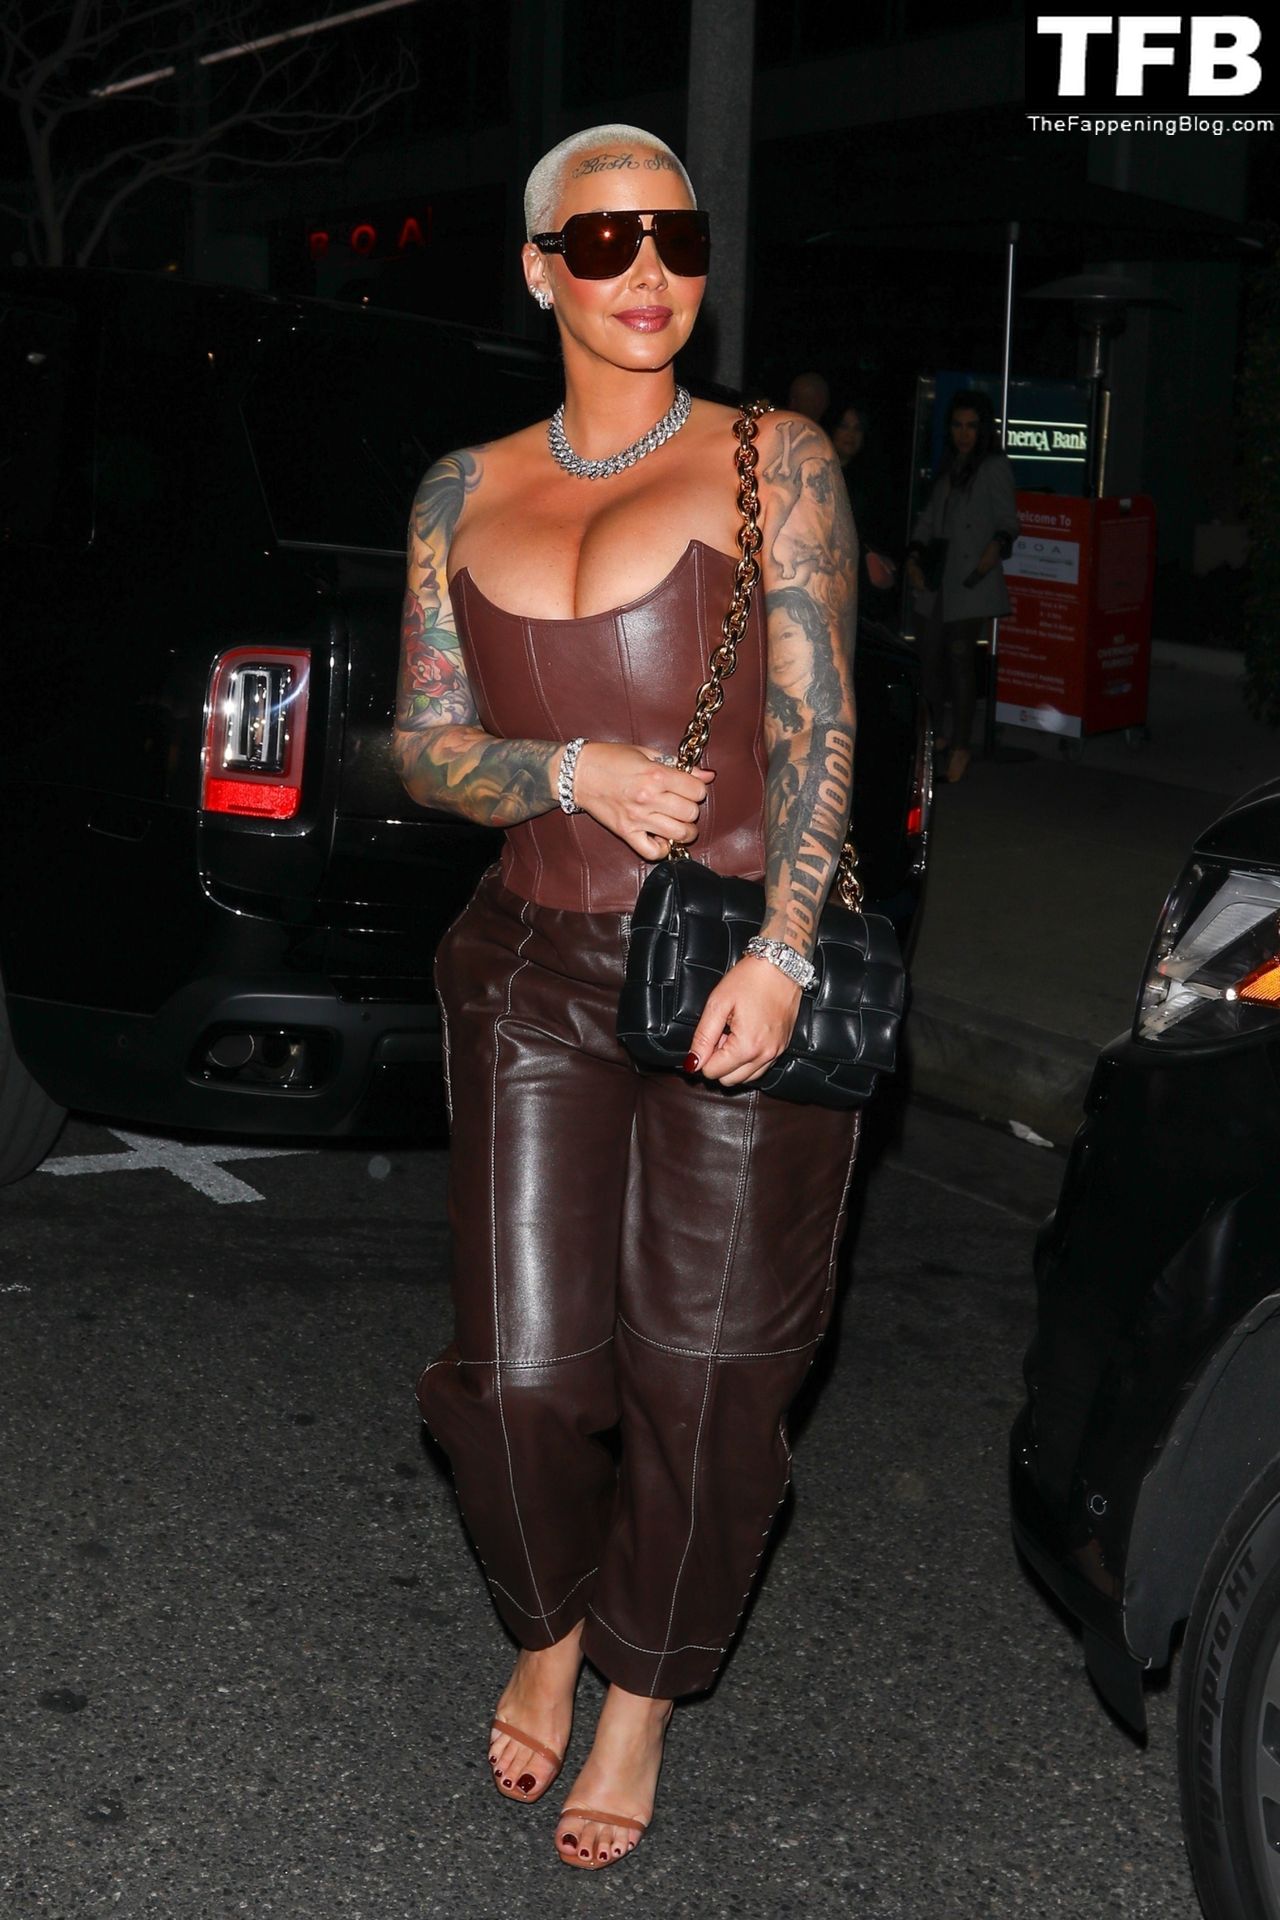 Amber-Rose-Sexy-The-Fappening-Blog-34.jpg